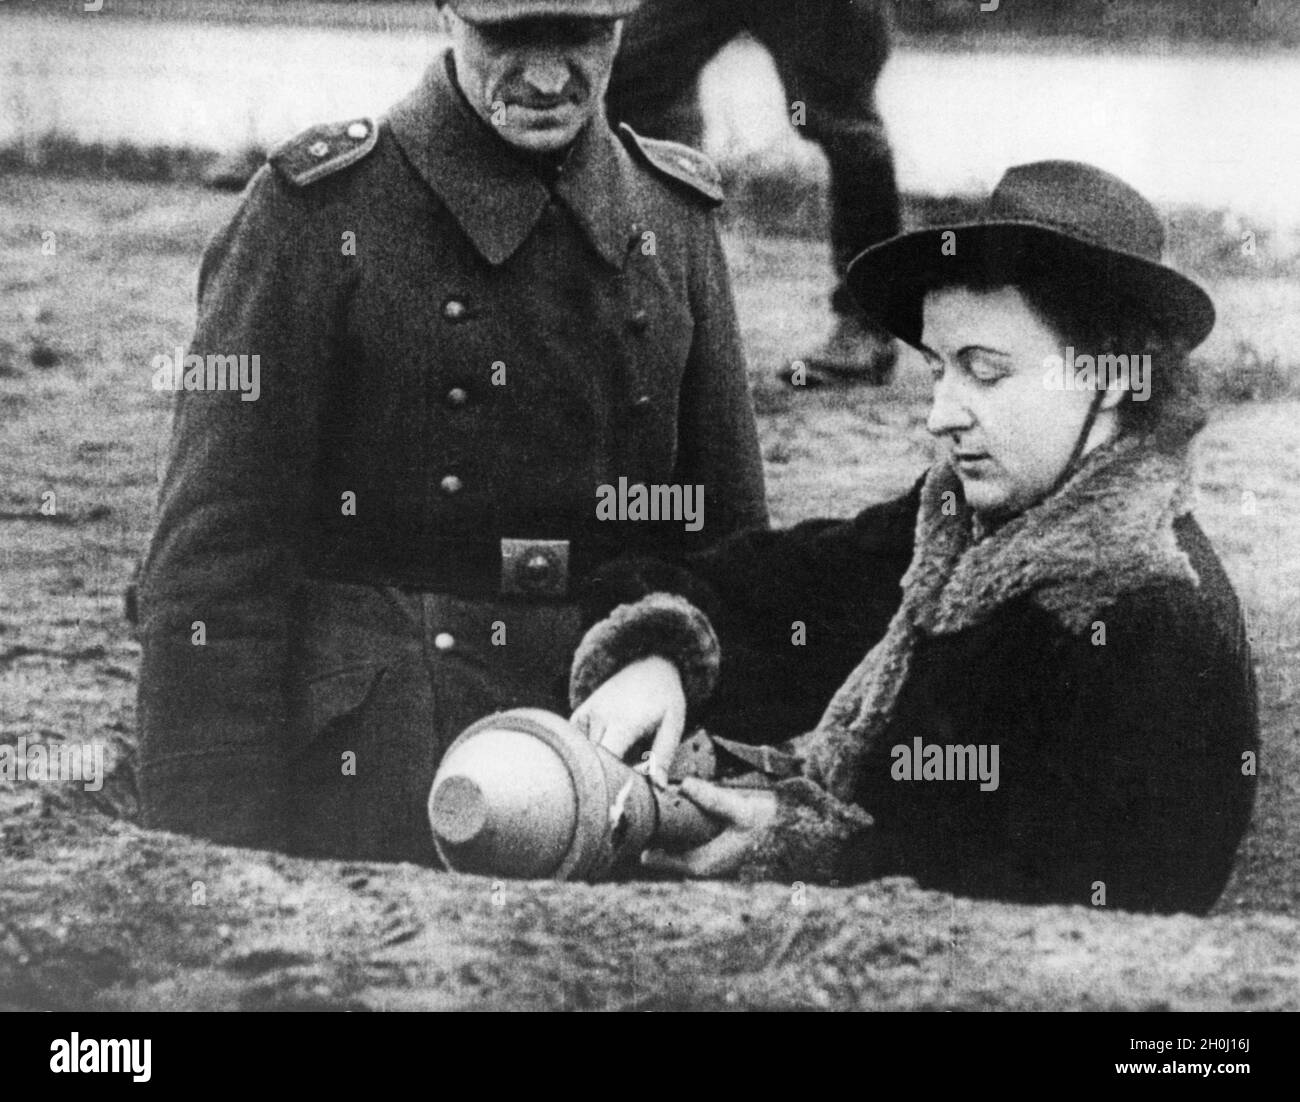 A soldier of the Reichswehr teaches a woman how to operate a bazooka during the last months of the war. (undated photo) [automated translation] Stock Photo